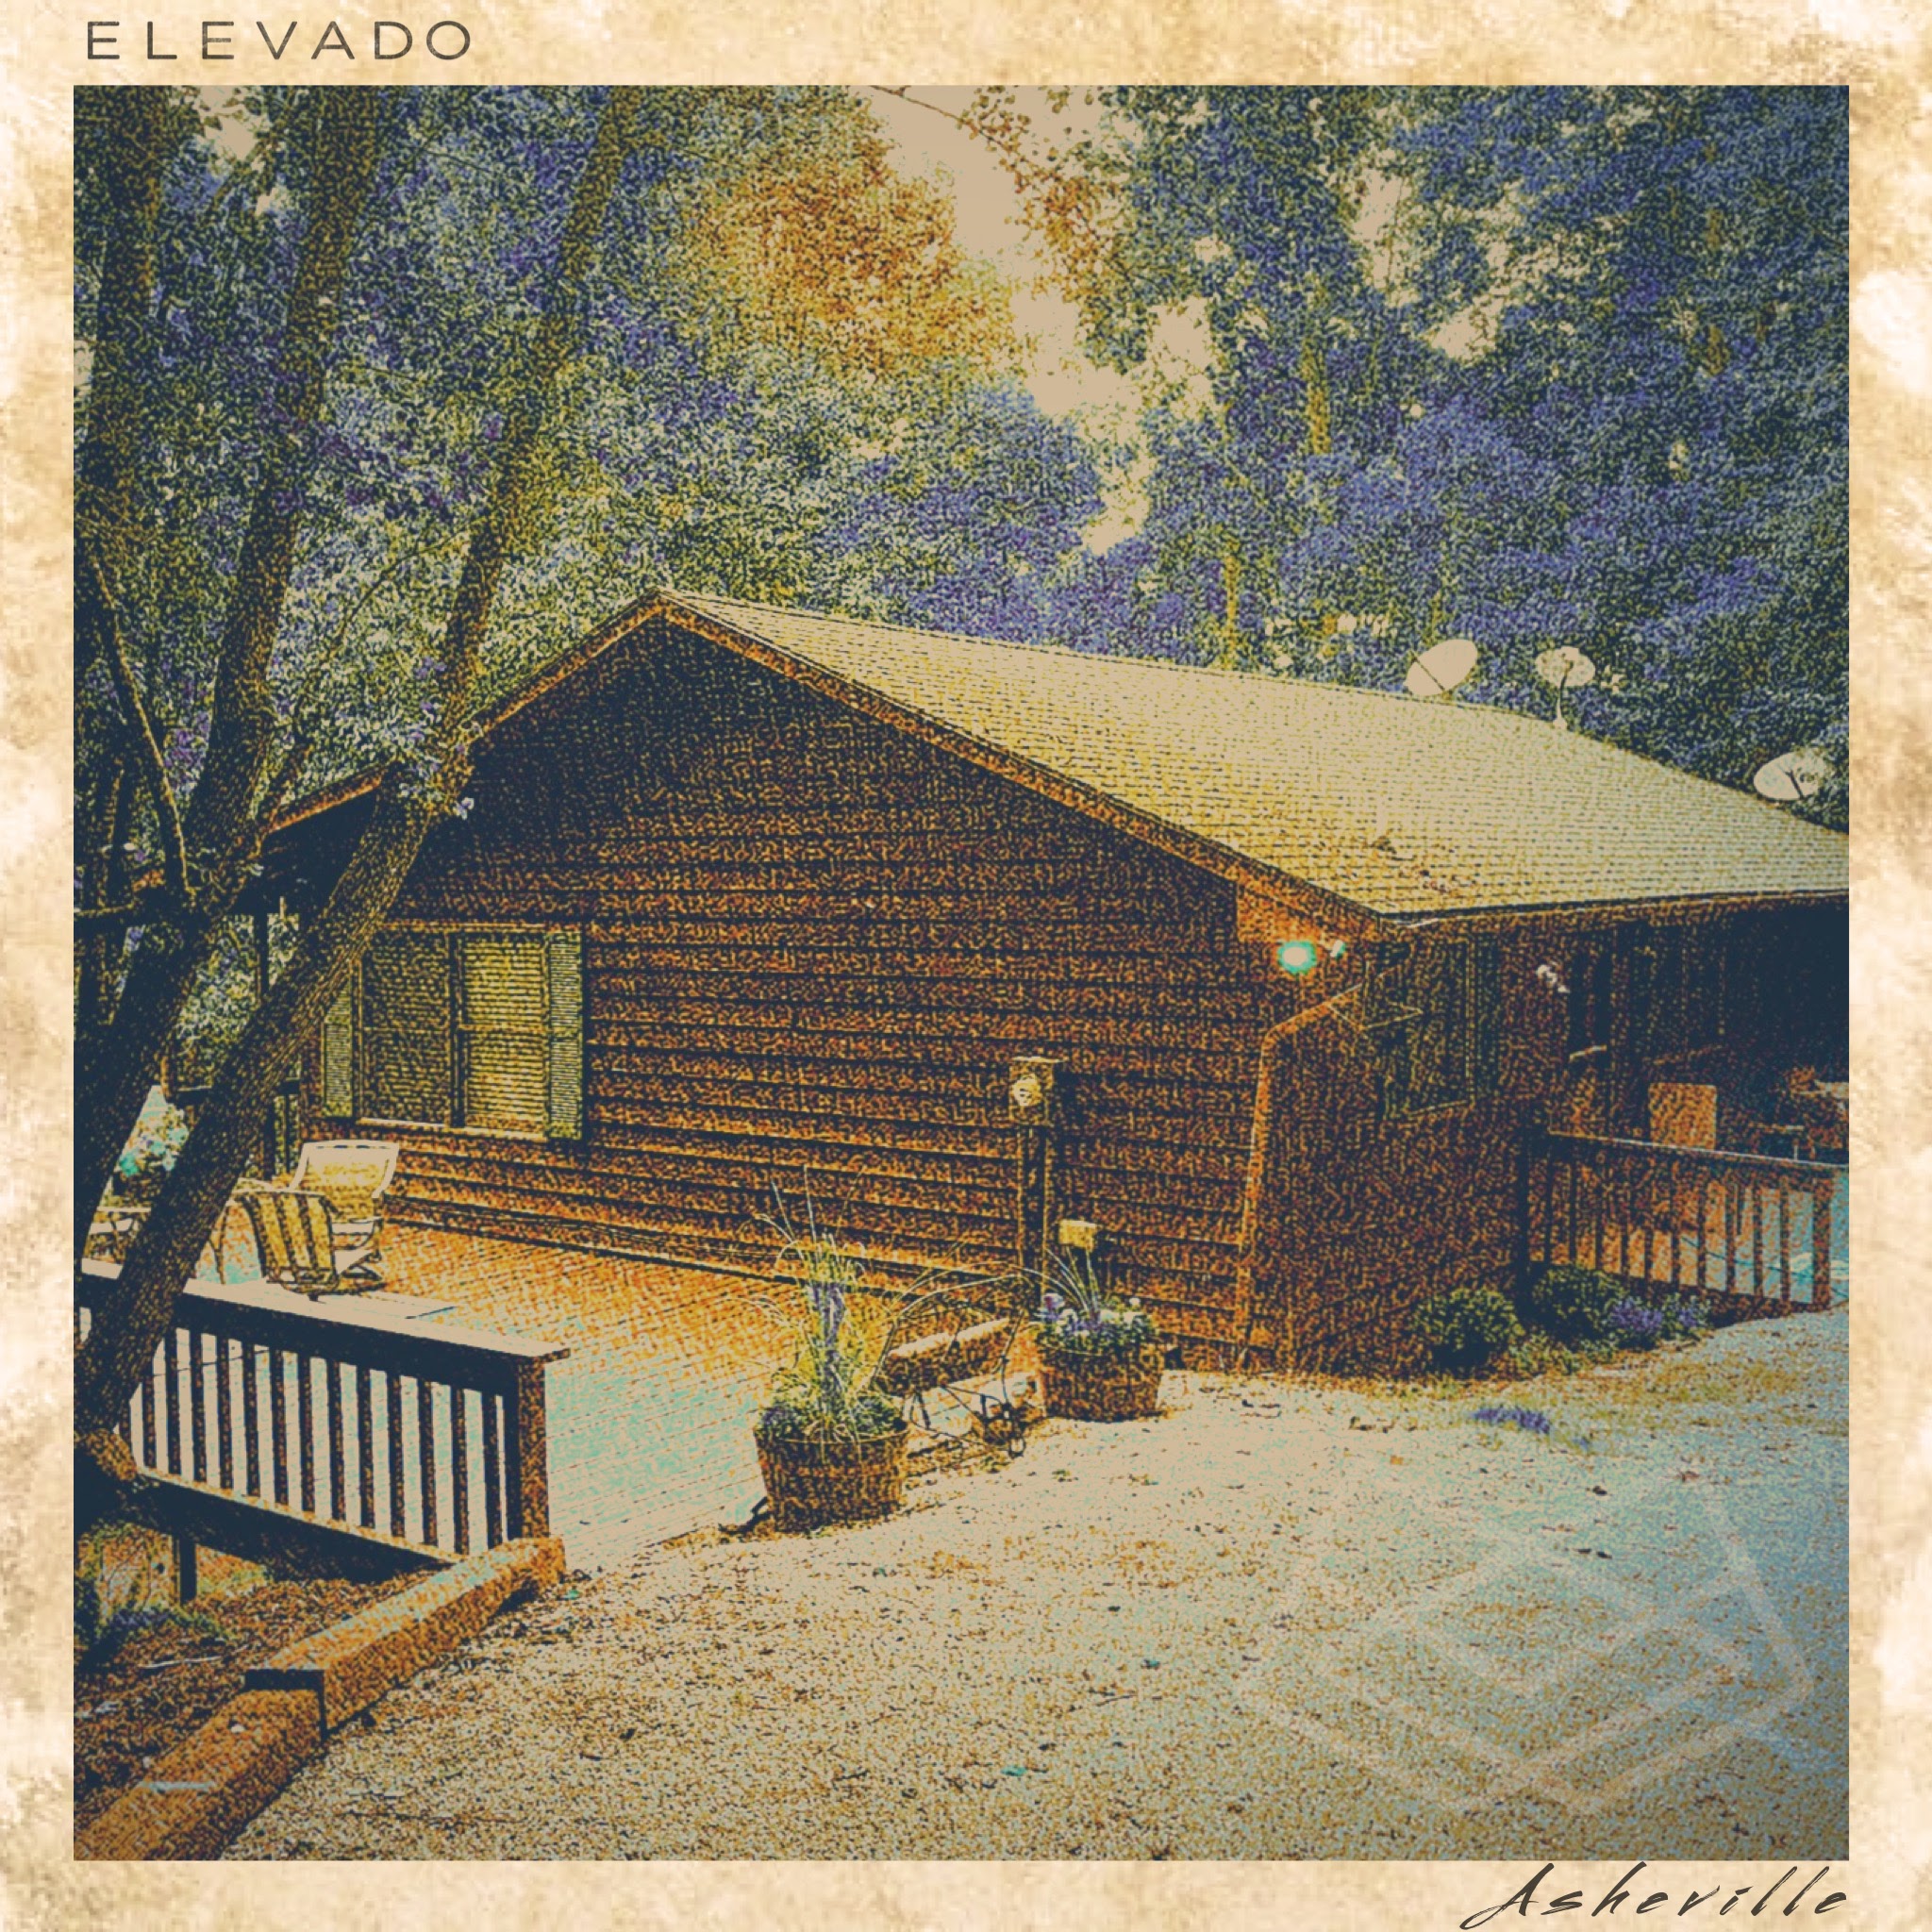 Cover art for "Asheville," the debut EP by Elevado